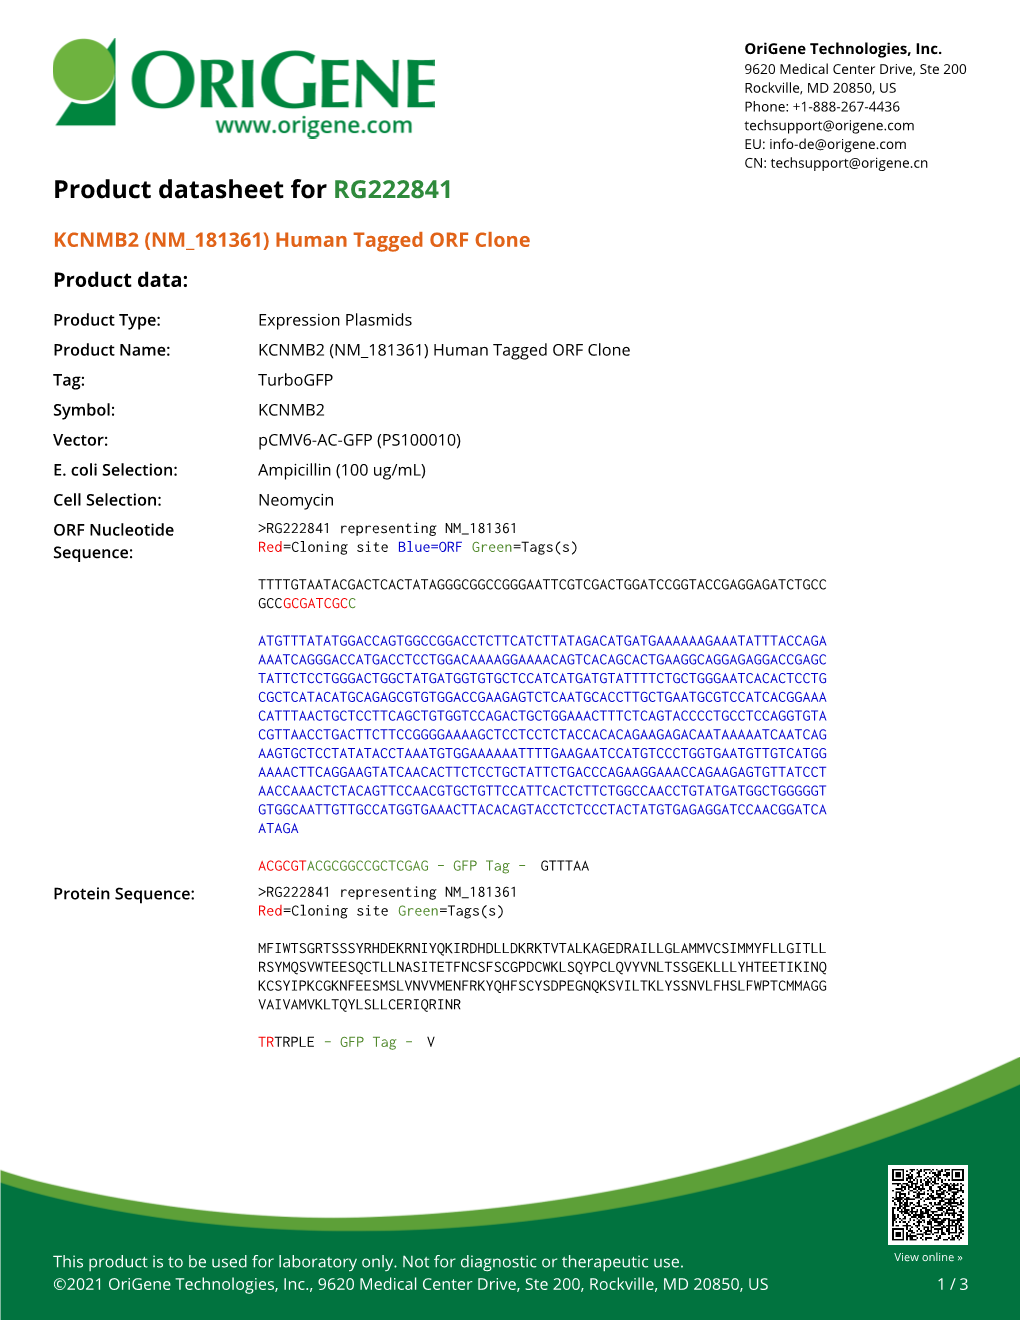 KCNMB2 (NM 181361) Human Tagged ORF Clone Product Data